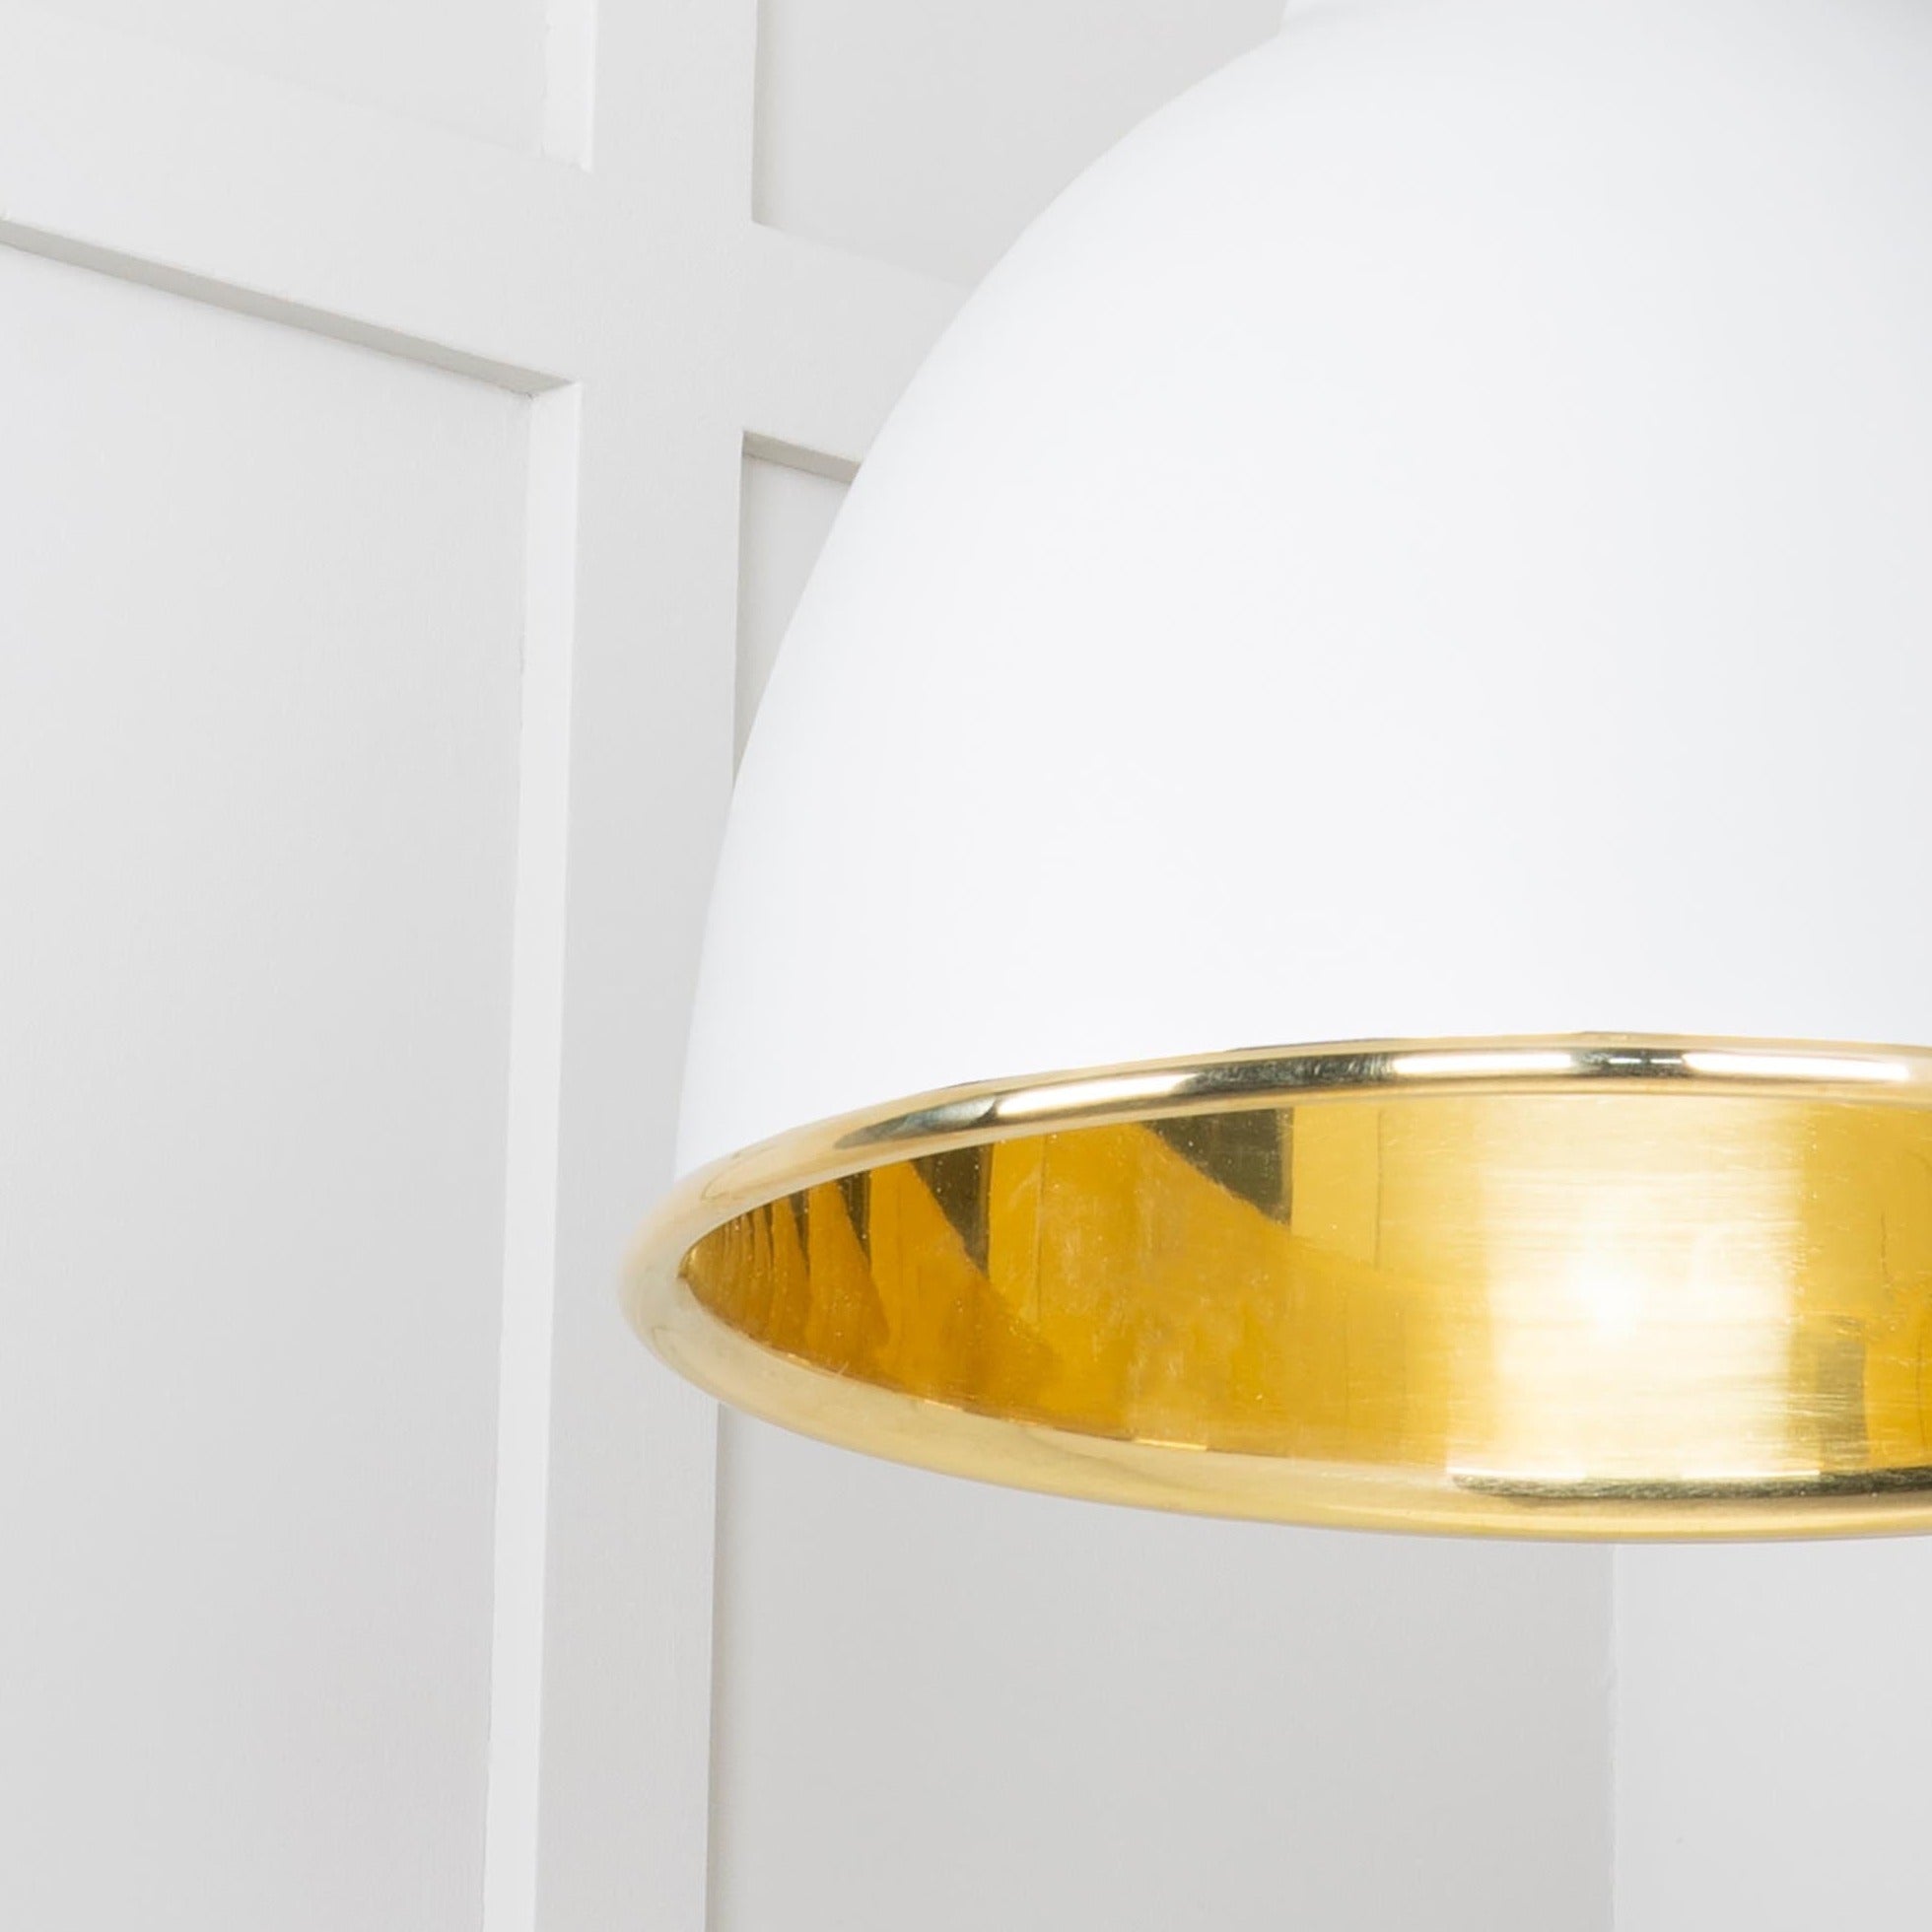  SHOW Close Up Image of Brindley Cluster Light in Flock in Smooth Brass